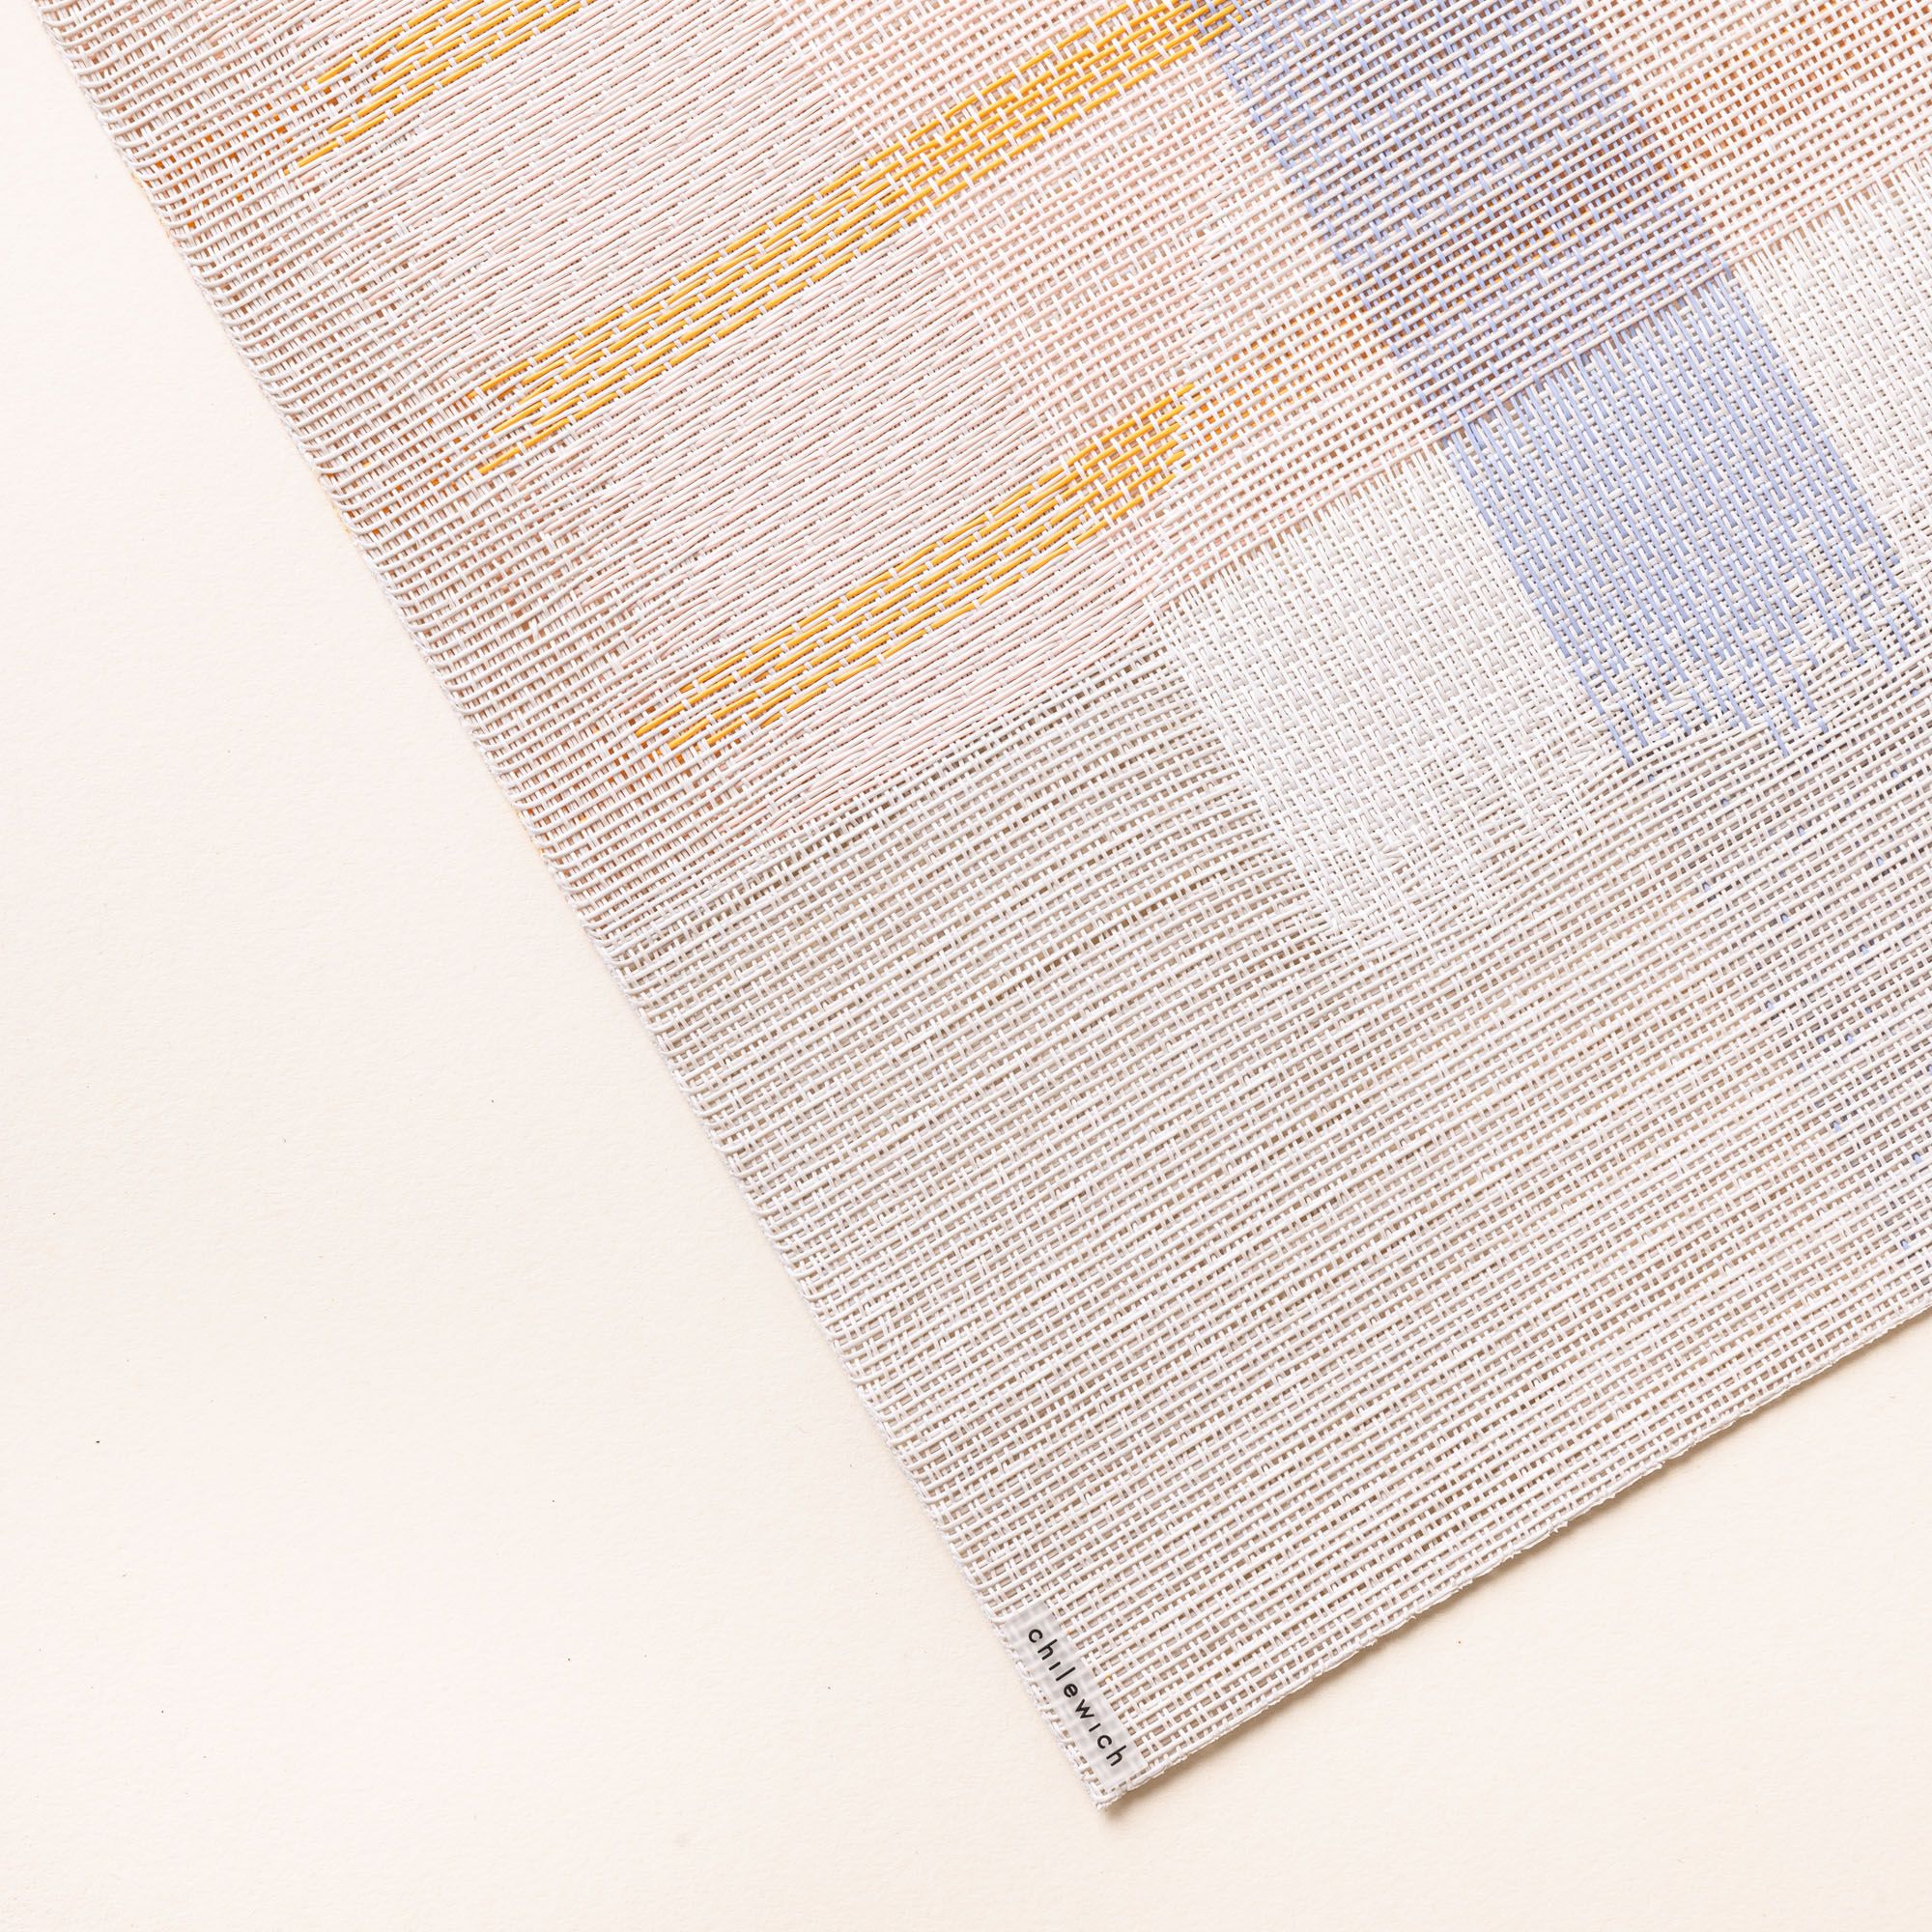 A close up of a corner of a placemat with a soft artful geometric design featuring neutral, orange, white, and blue colors